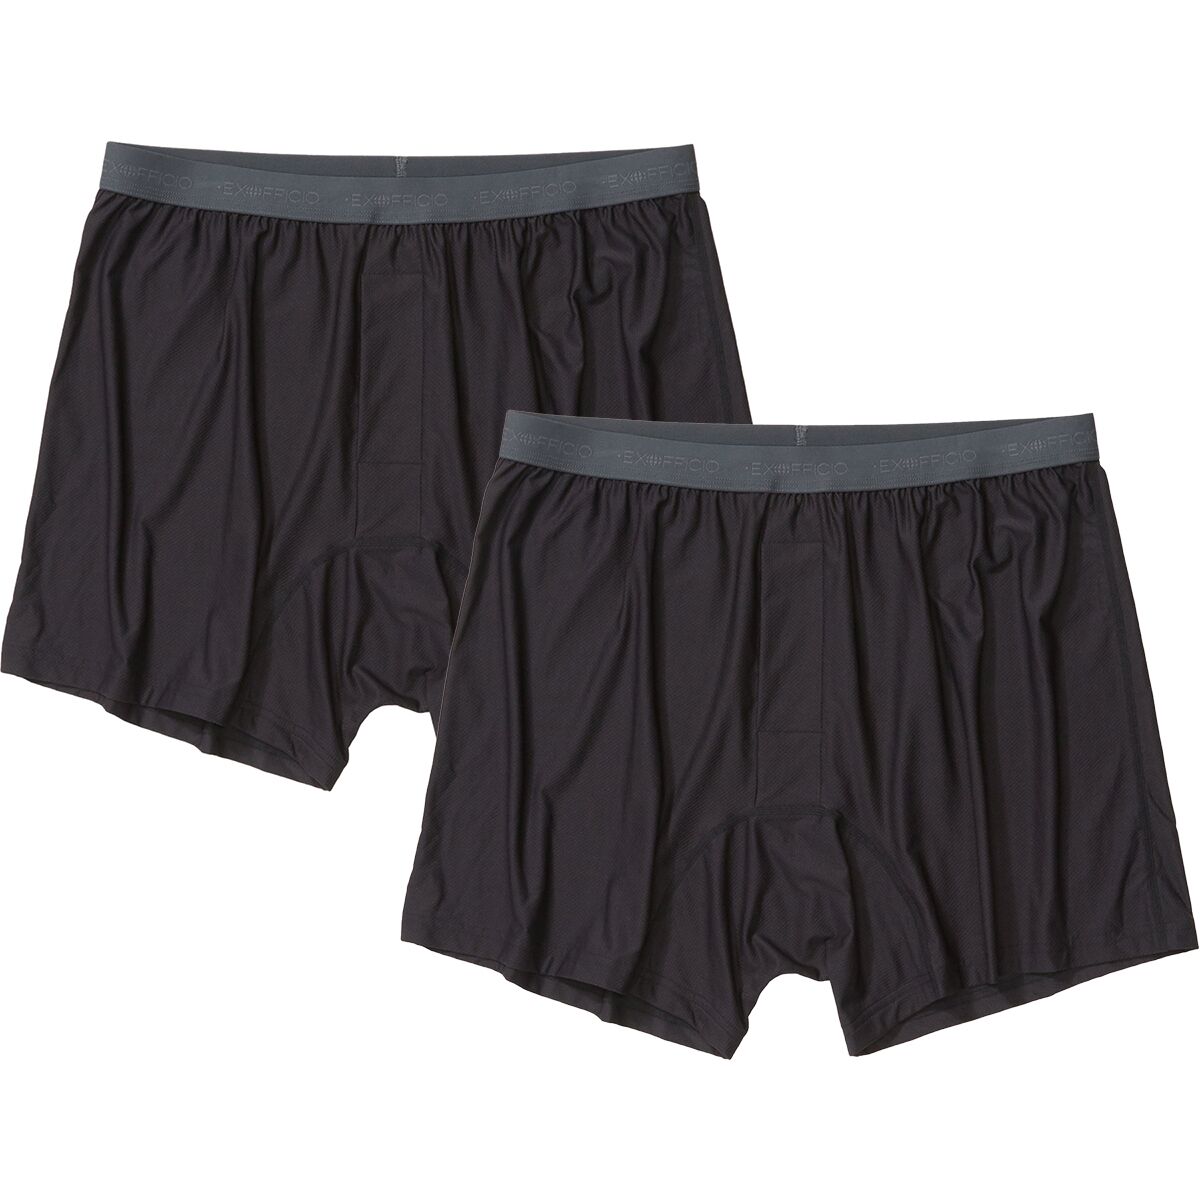 ExOfficio Give-N-Go 2.0 Boxer Brief - 2-Pack - Men's